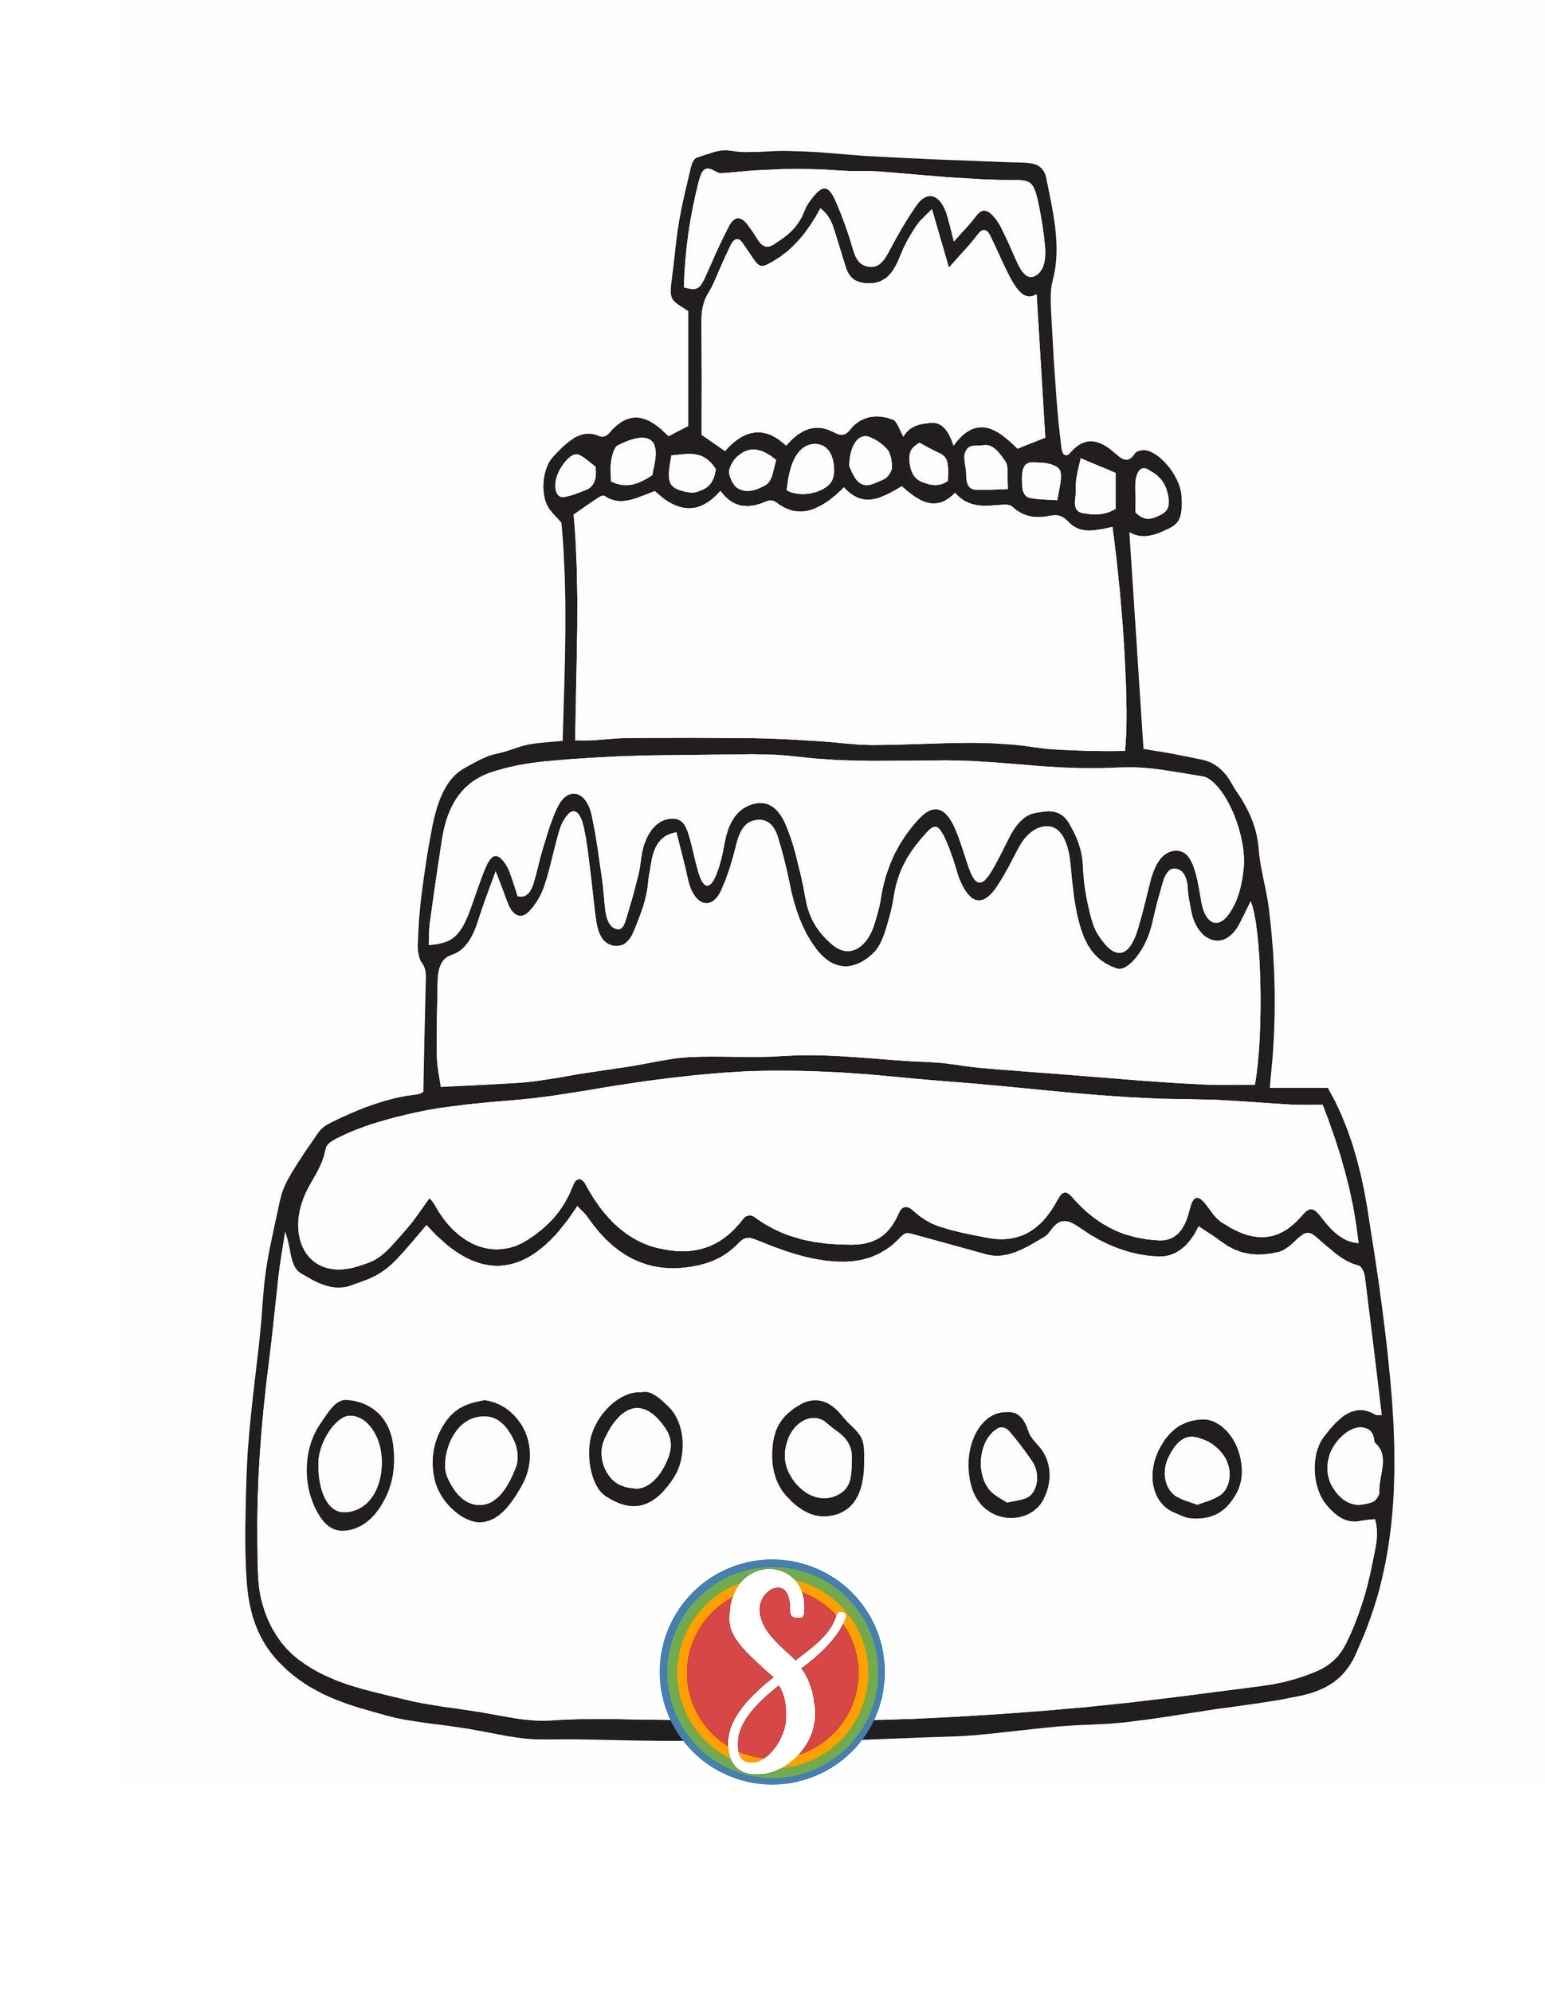 Unicorn Cake Coloring Page Download Printable PDF | Templateroller